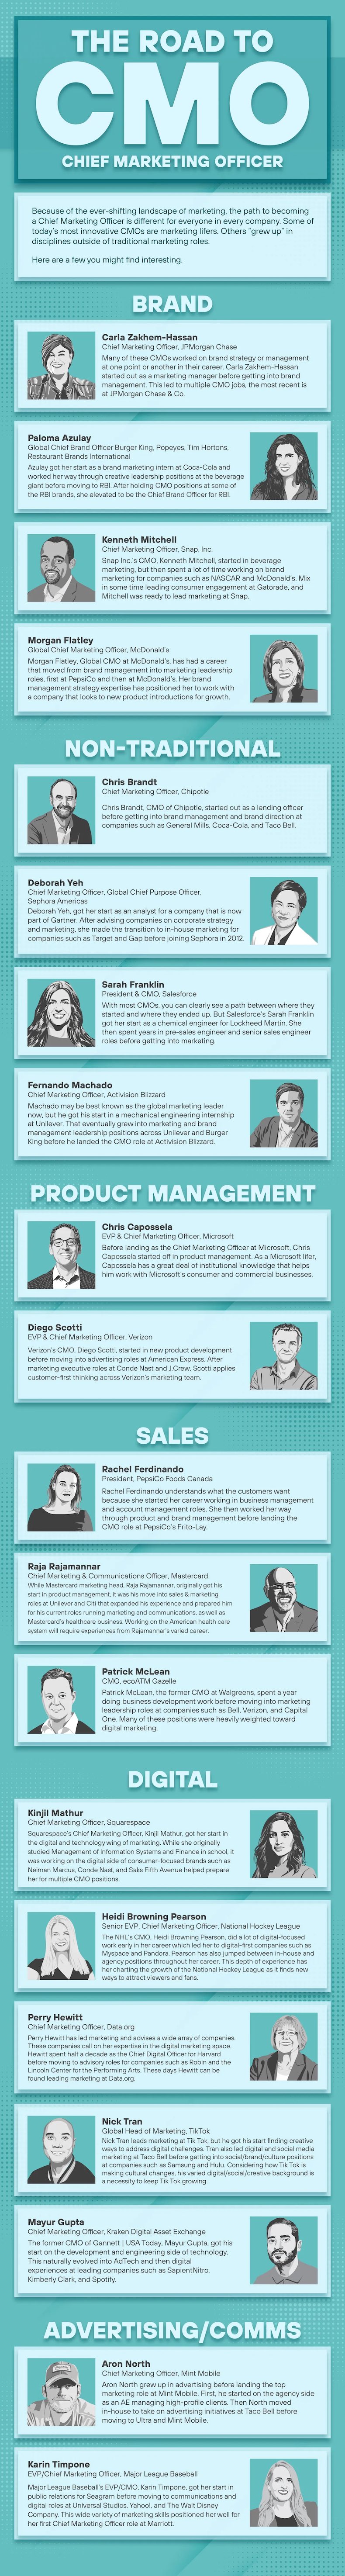 The road to Chief Marketing Officer infographic